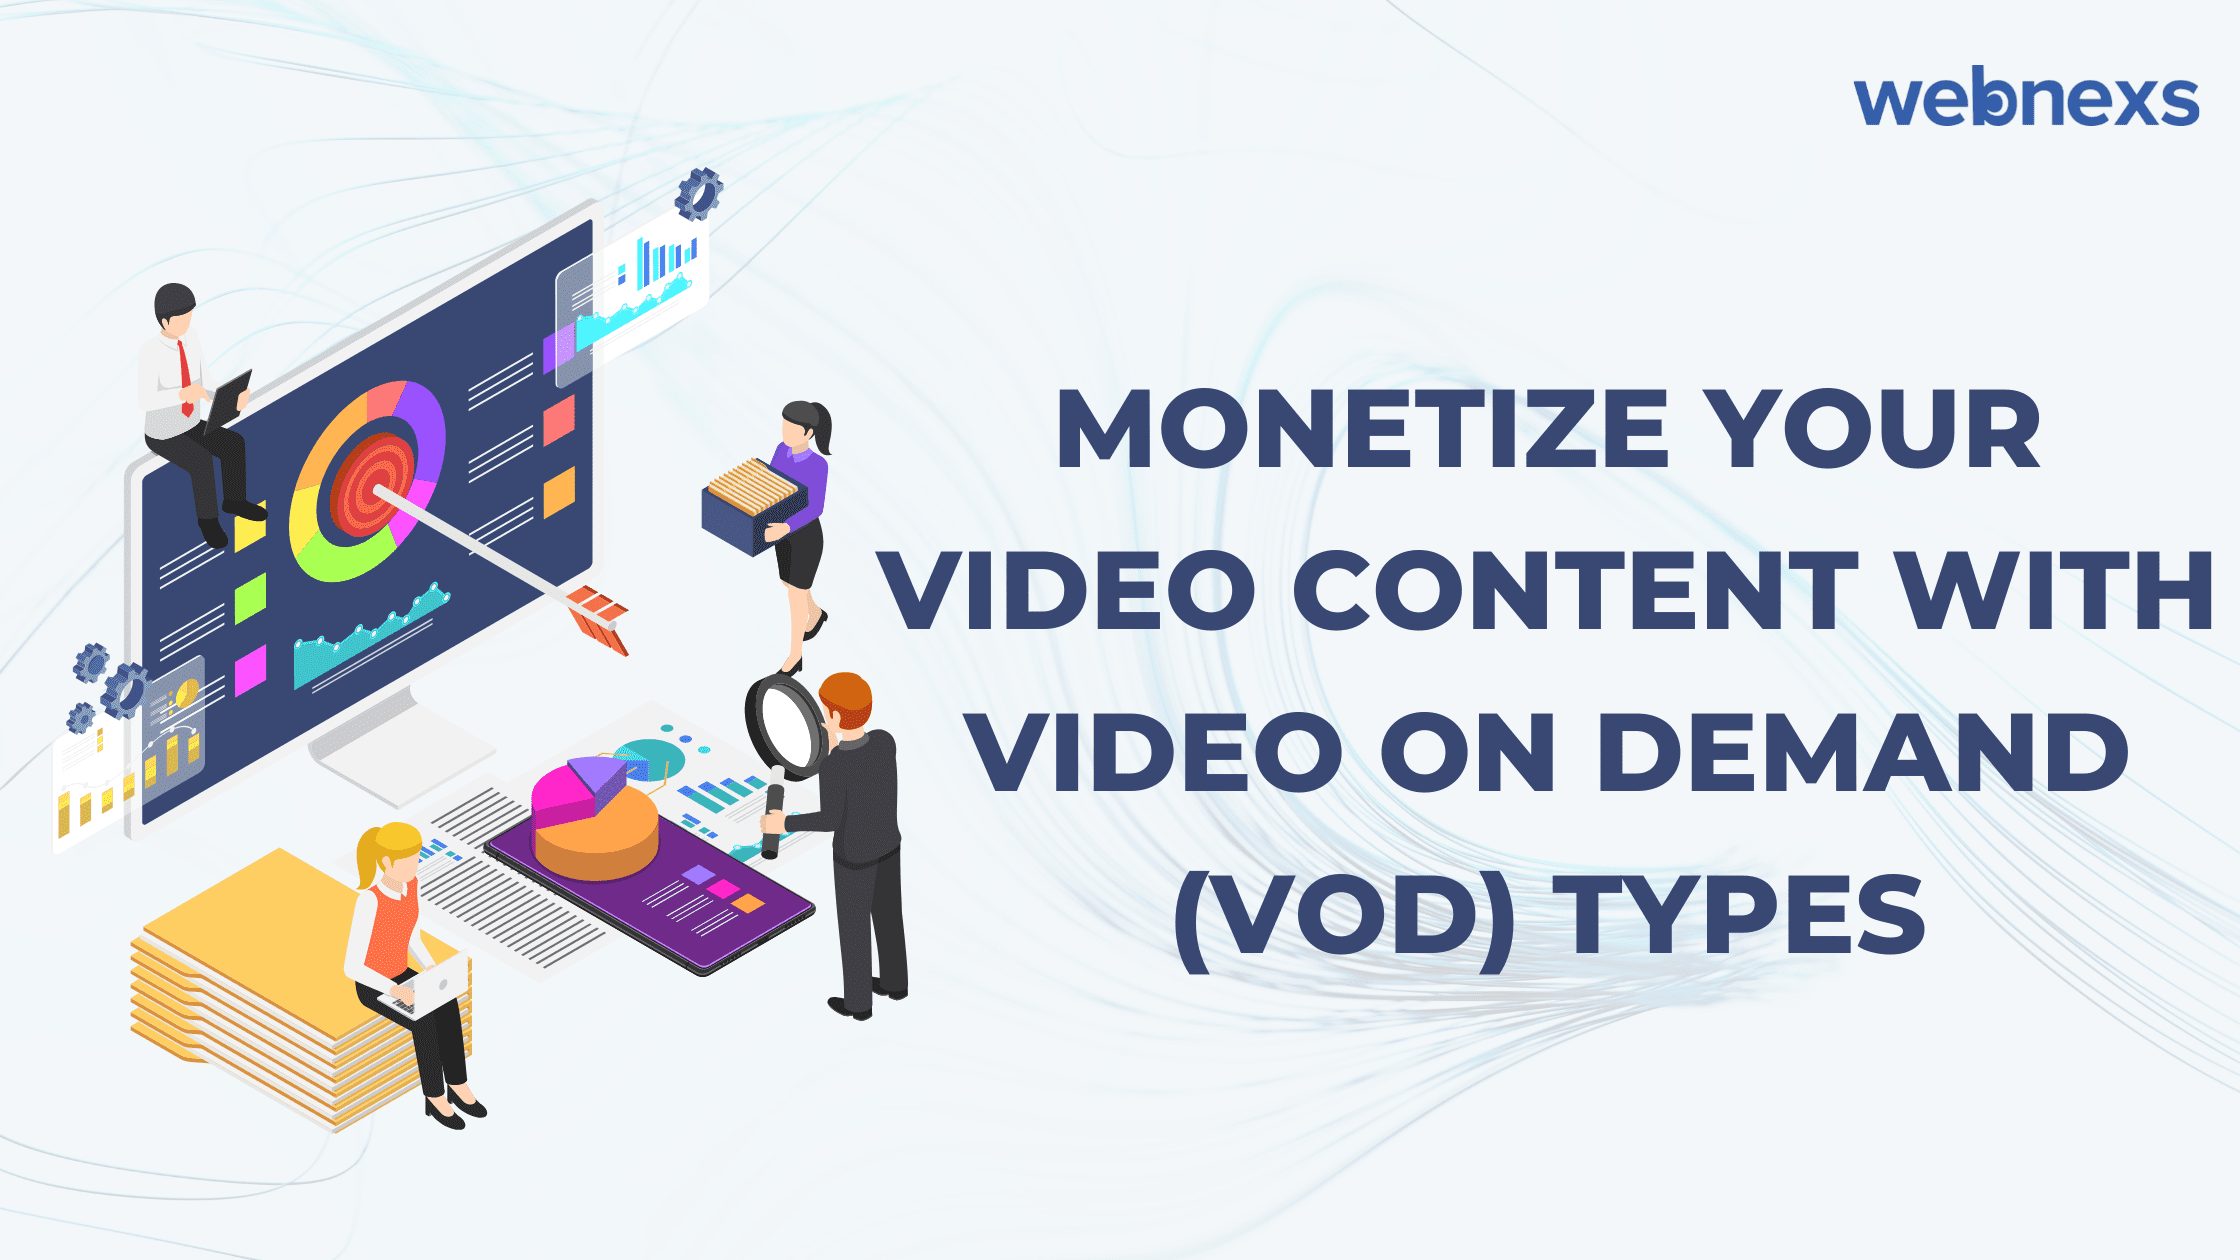 Monetize Your Video Content With Video On Demand (VOD) Types